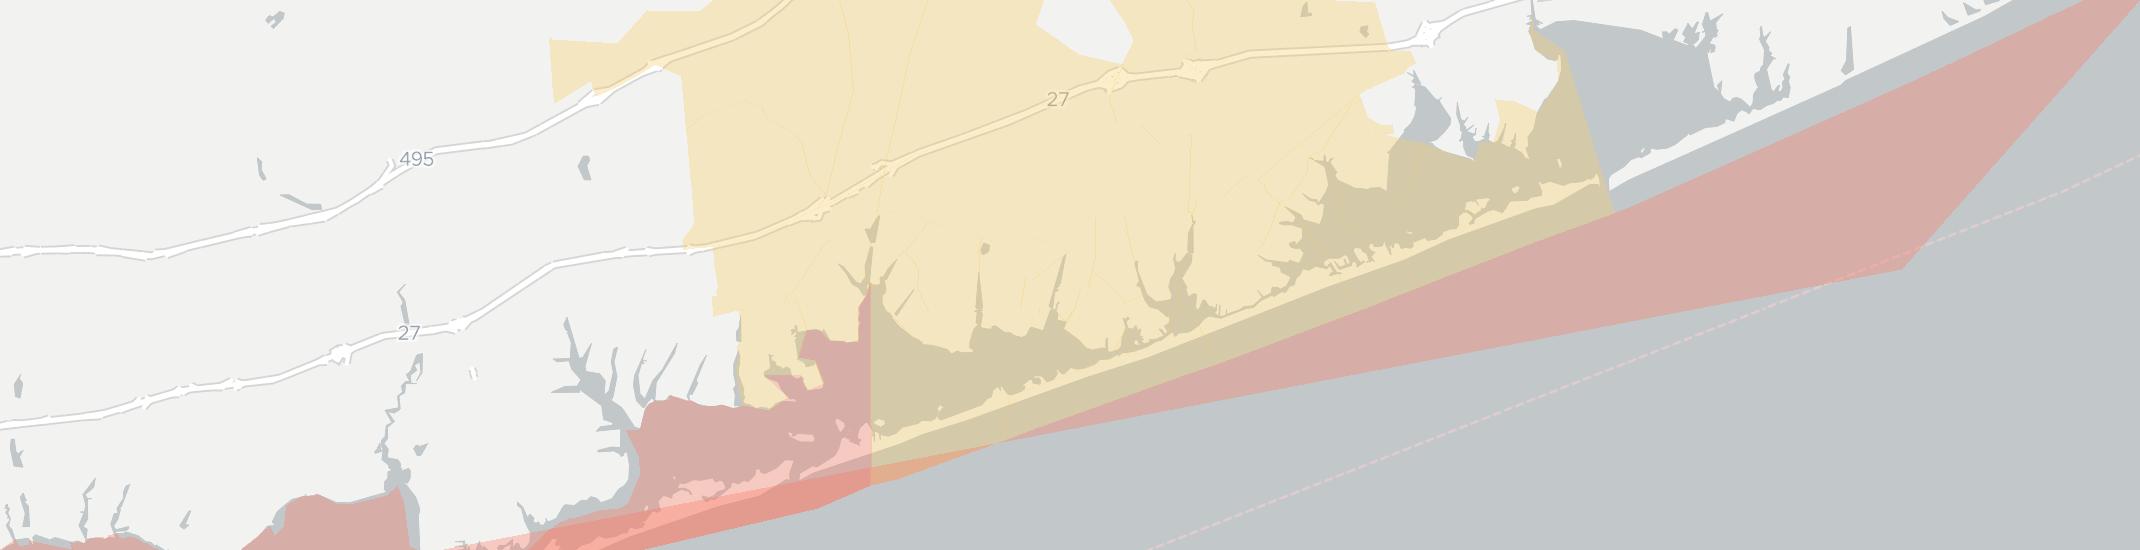 Westhampton Beach Internet Competition Map. Click for interactive map.